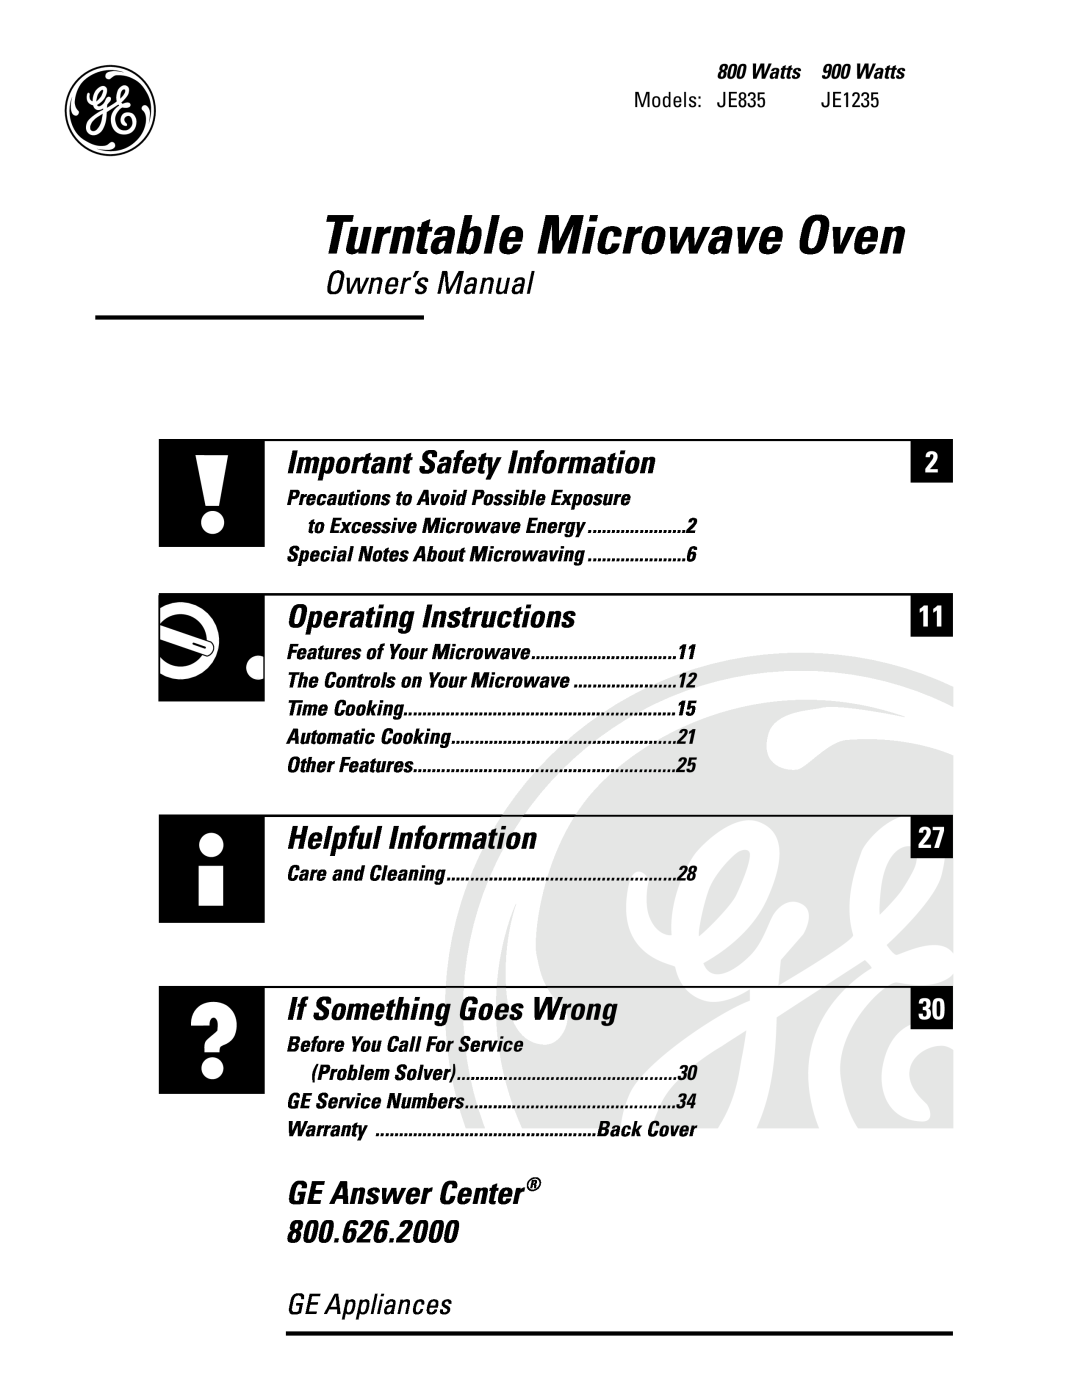 GE JE1235 operating instructions Important Safety Information, GE Answer Center, Turntable Microwave Oven, Owner’s Manual 